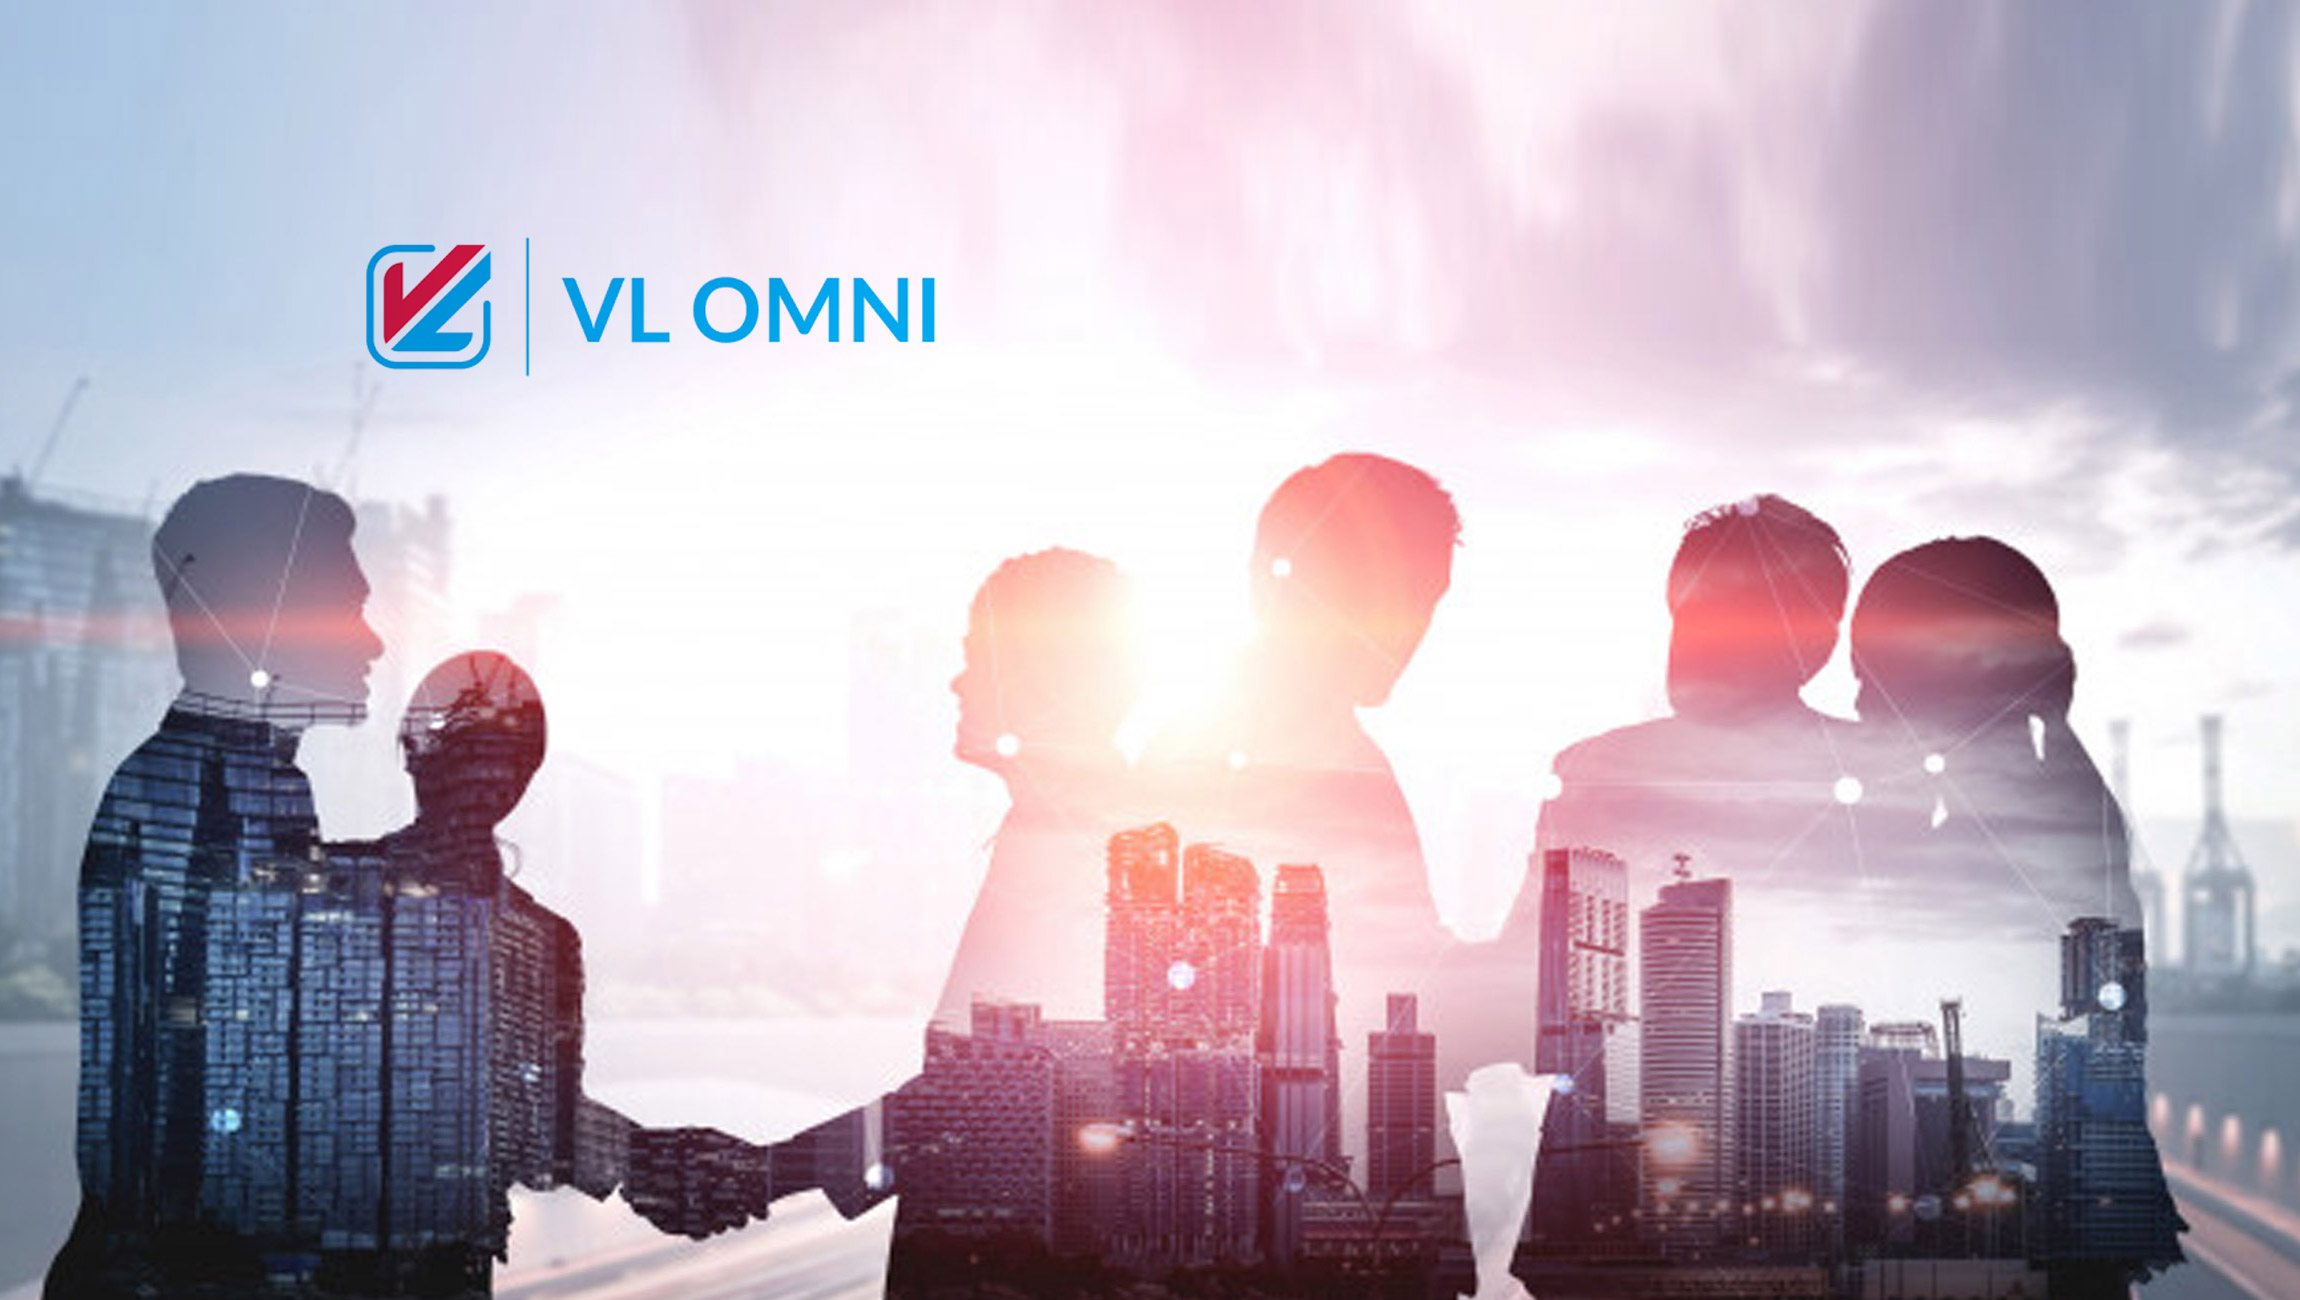 VL OMNI and Loop Partner to Bring Greater Return Integration Options to Scaling Brands